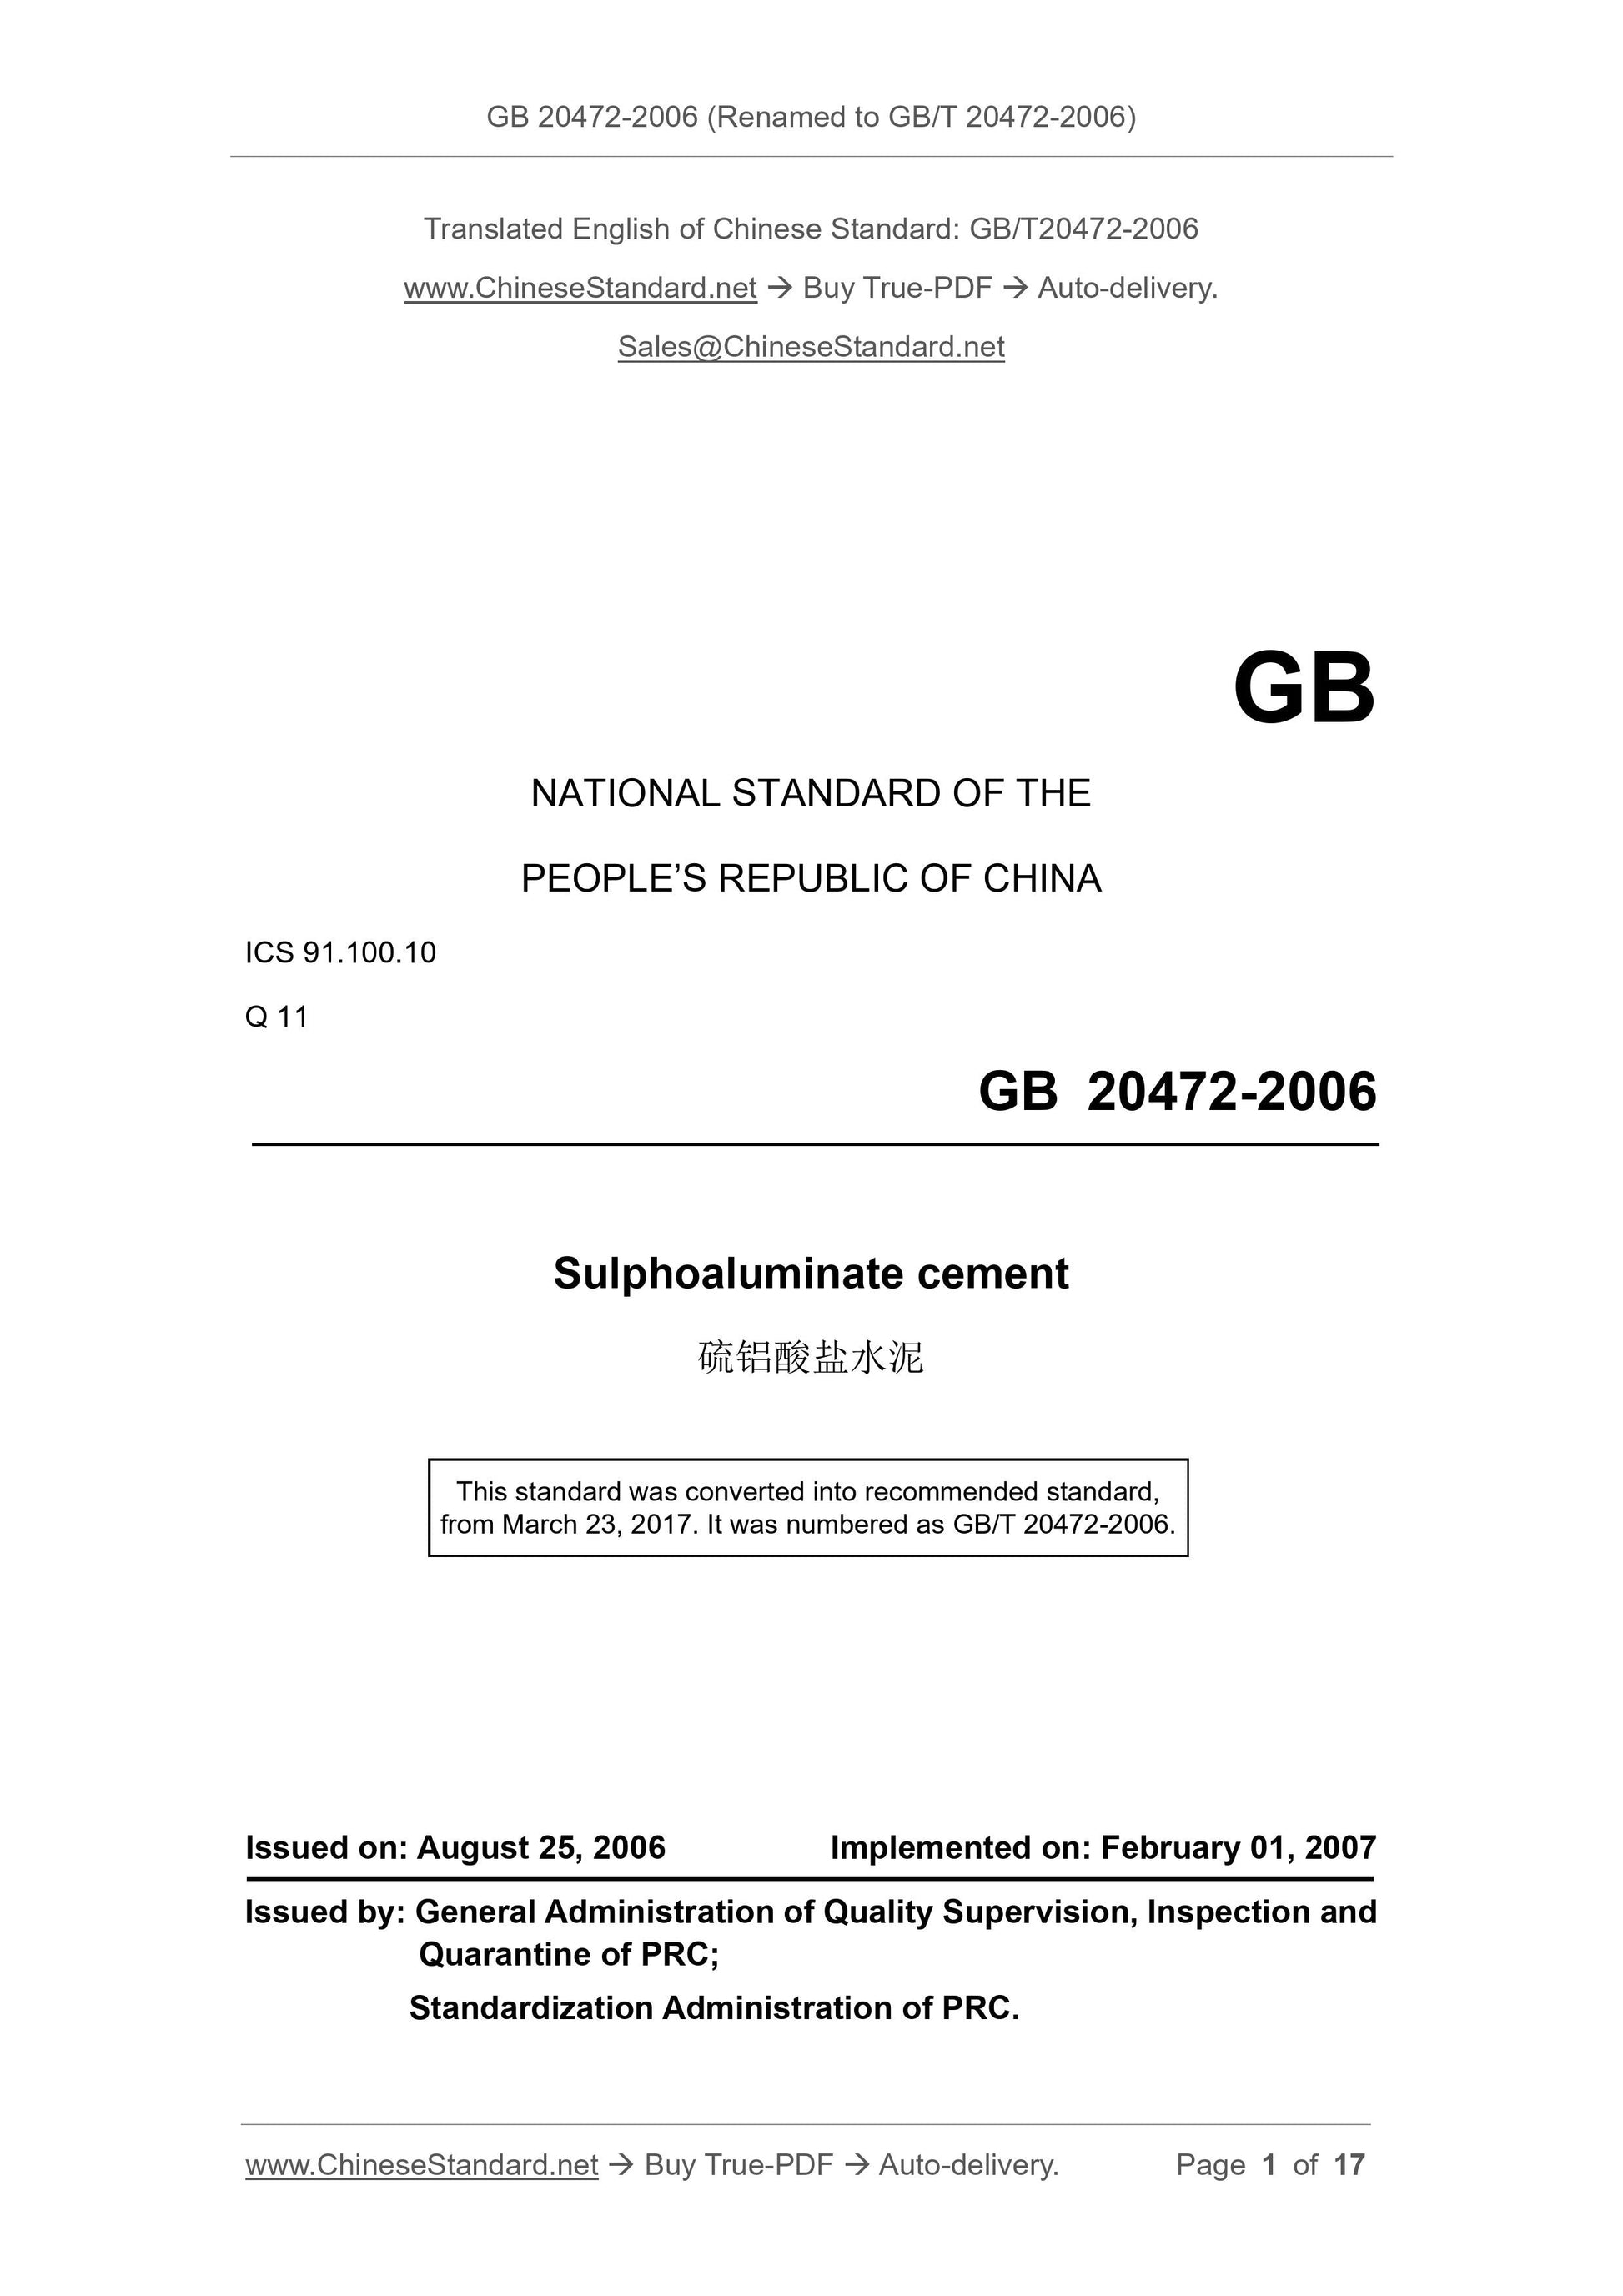 GB 20472-2006 Page 1